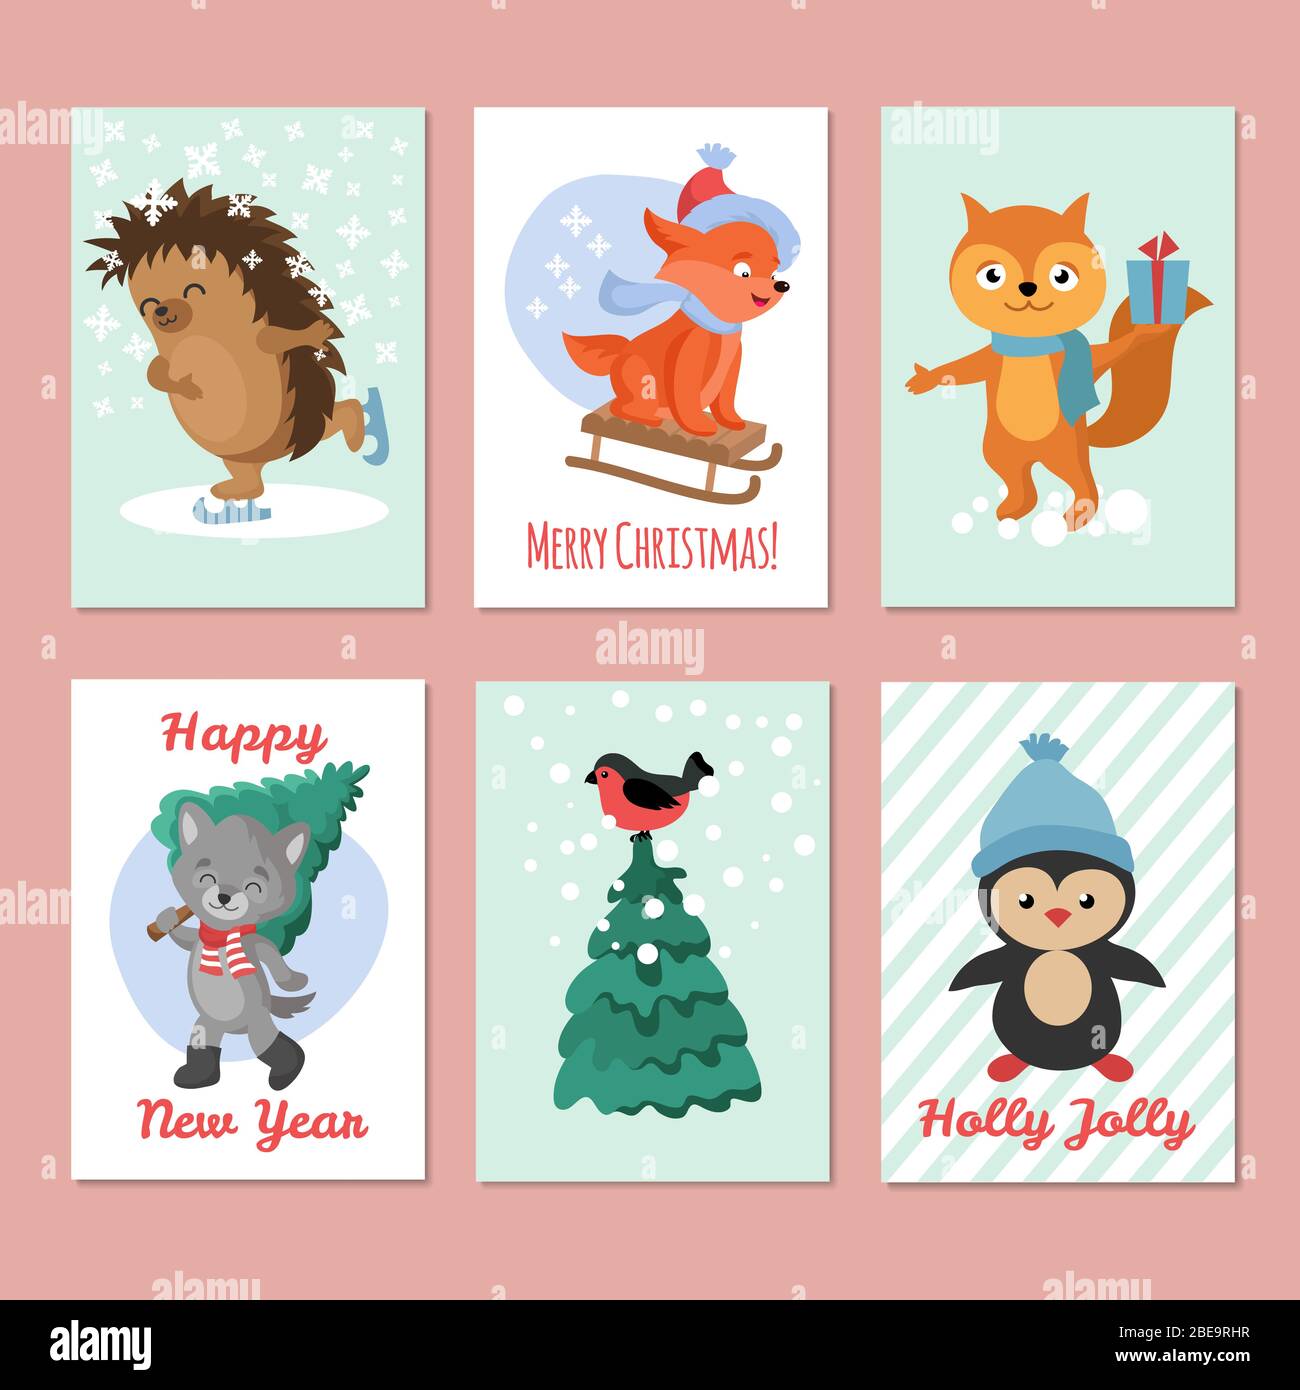 Happy new year vector flyers. Merry christmas postcard with cute winter animals. Xmas card with penguin and hedgehog, wolf and bird illustration Stock Vector